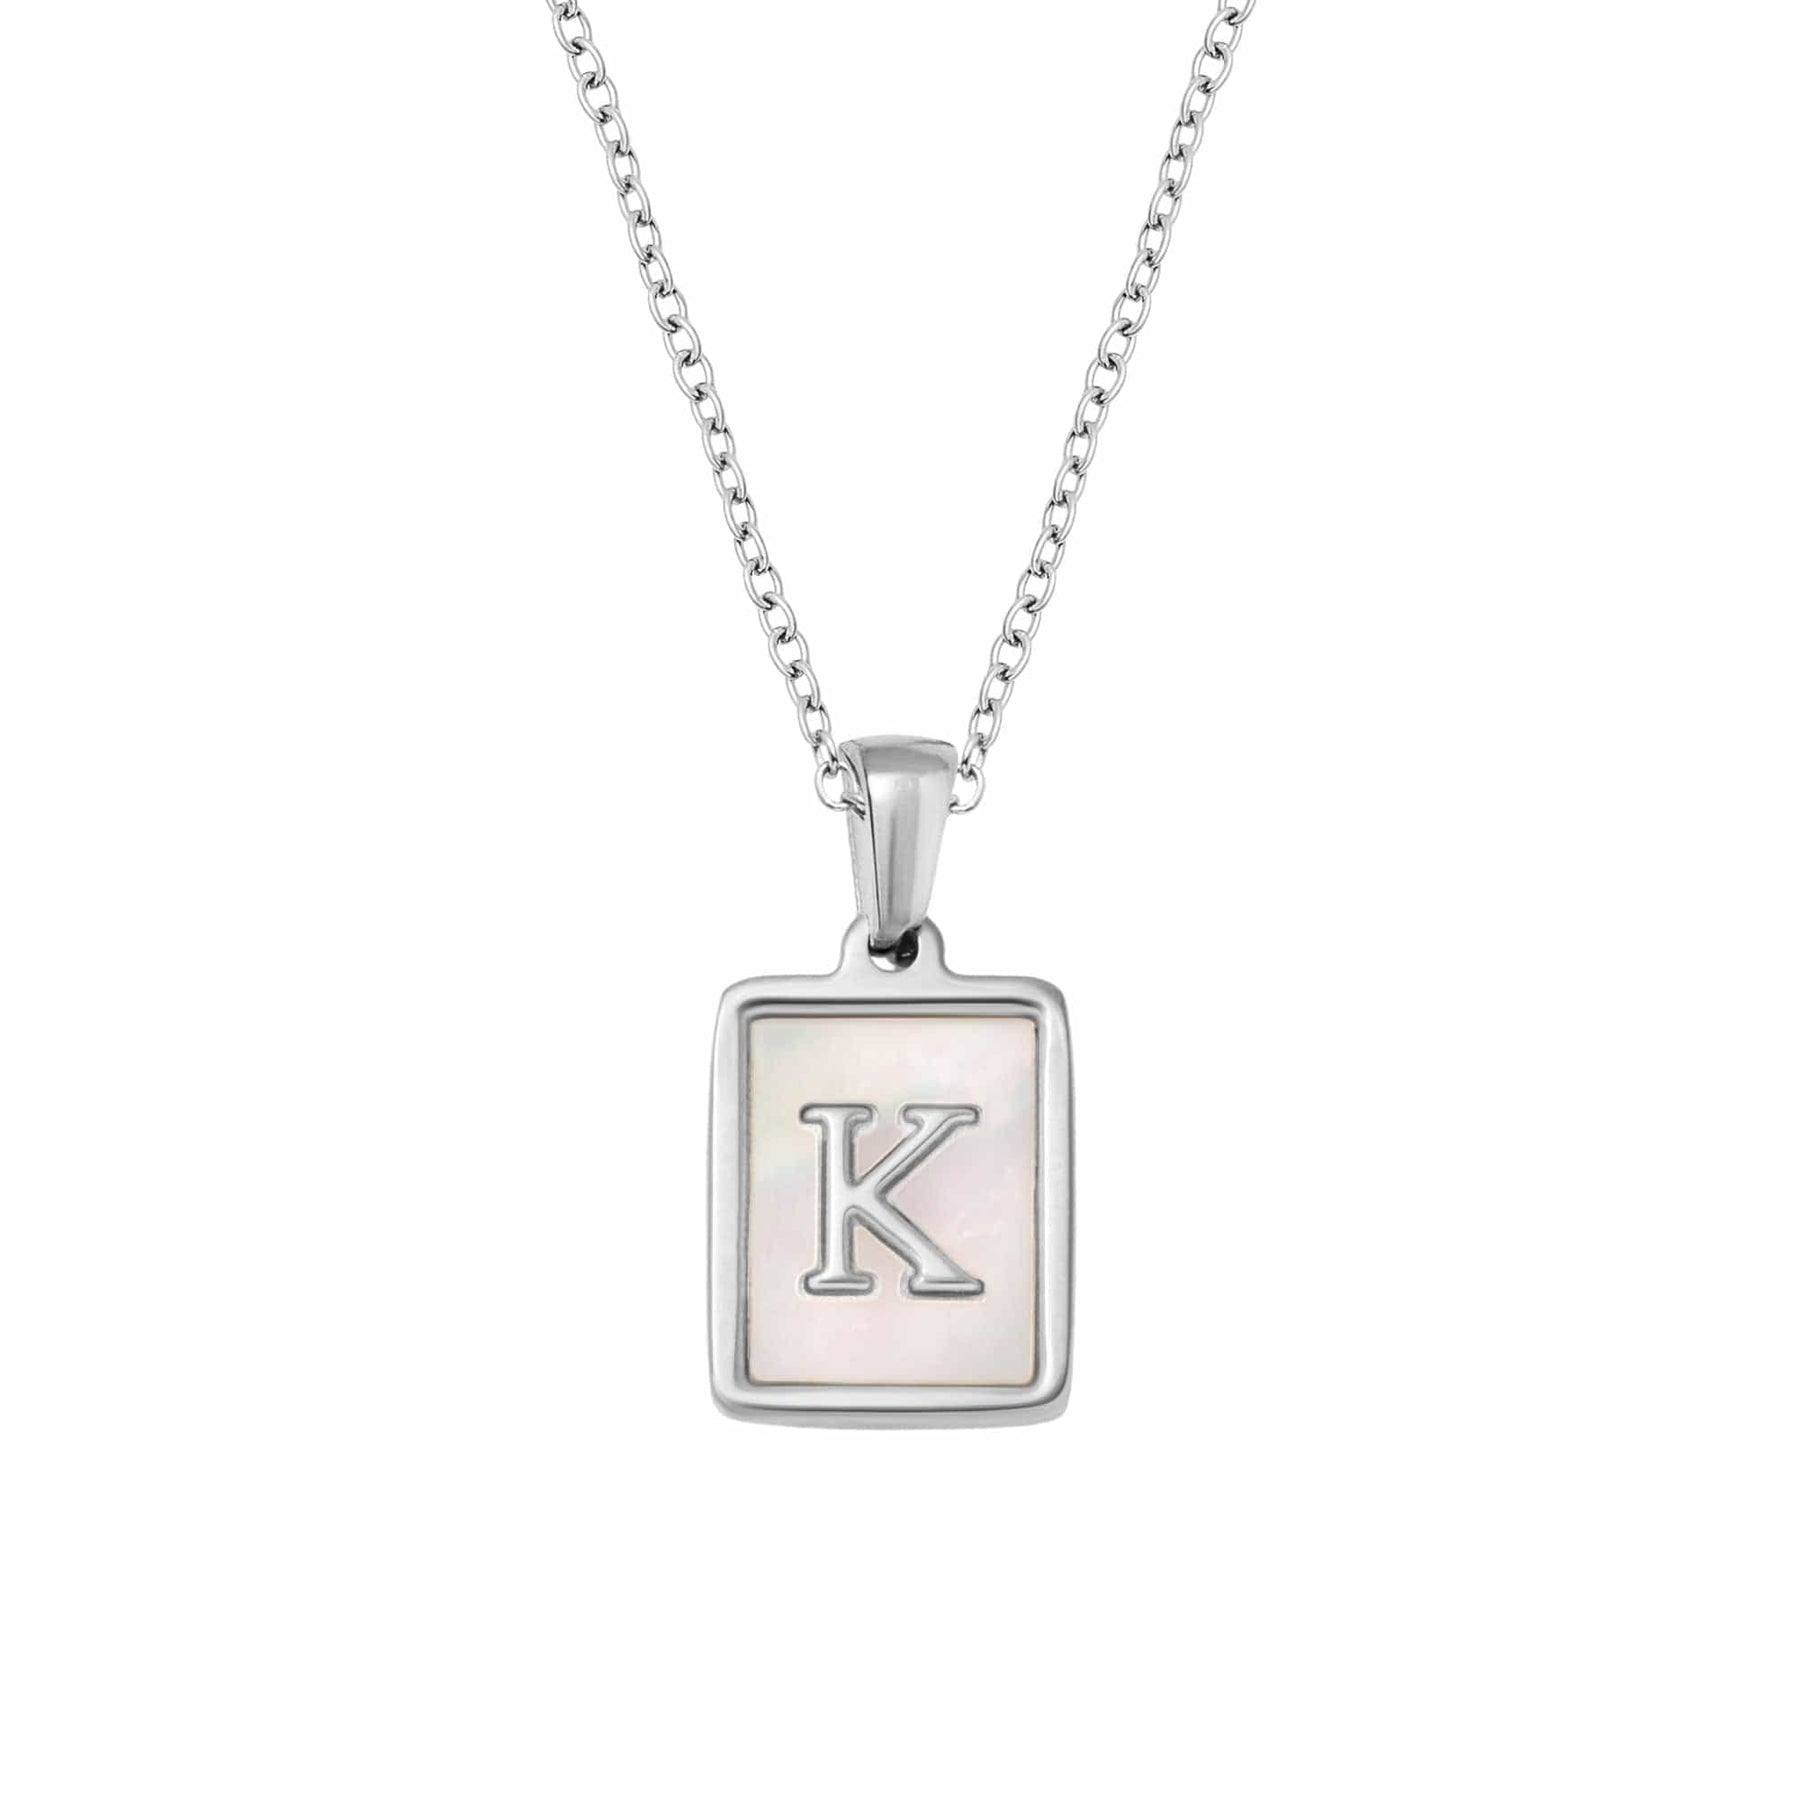 BohoMoon Stainless Steel Kelanhi Initial Necklace Silver / A